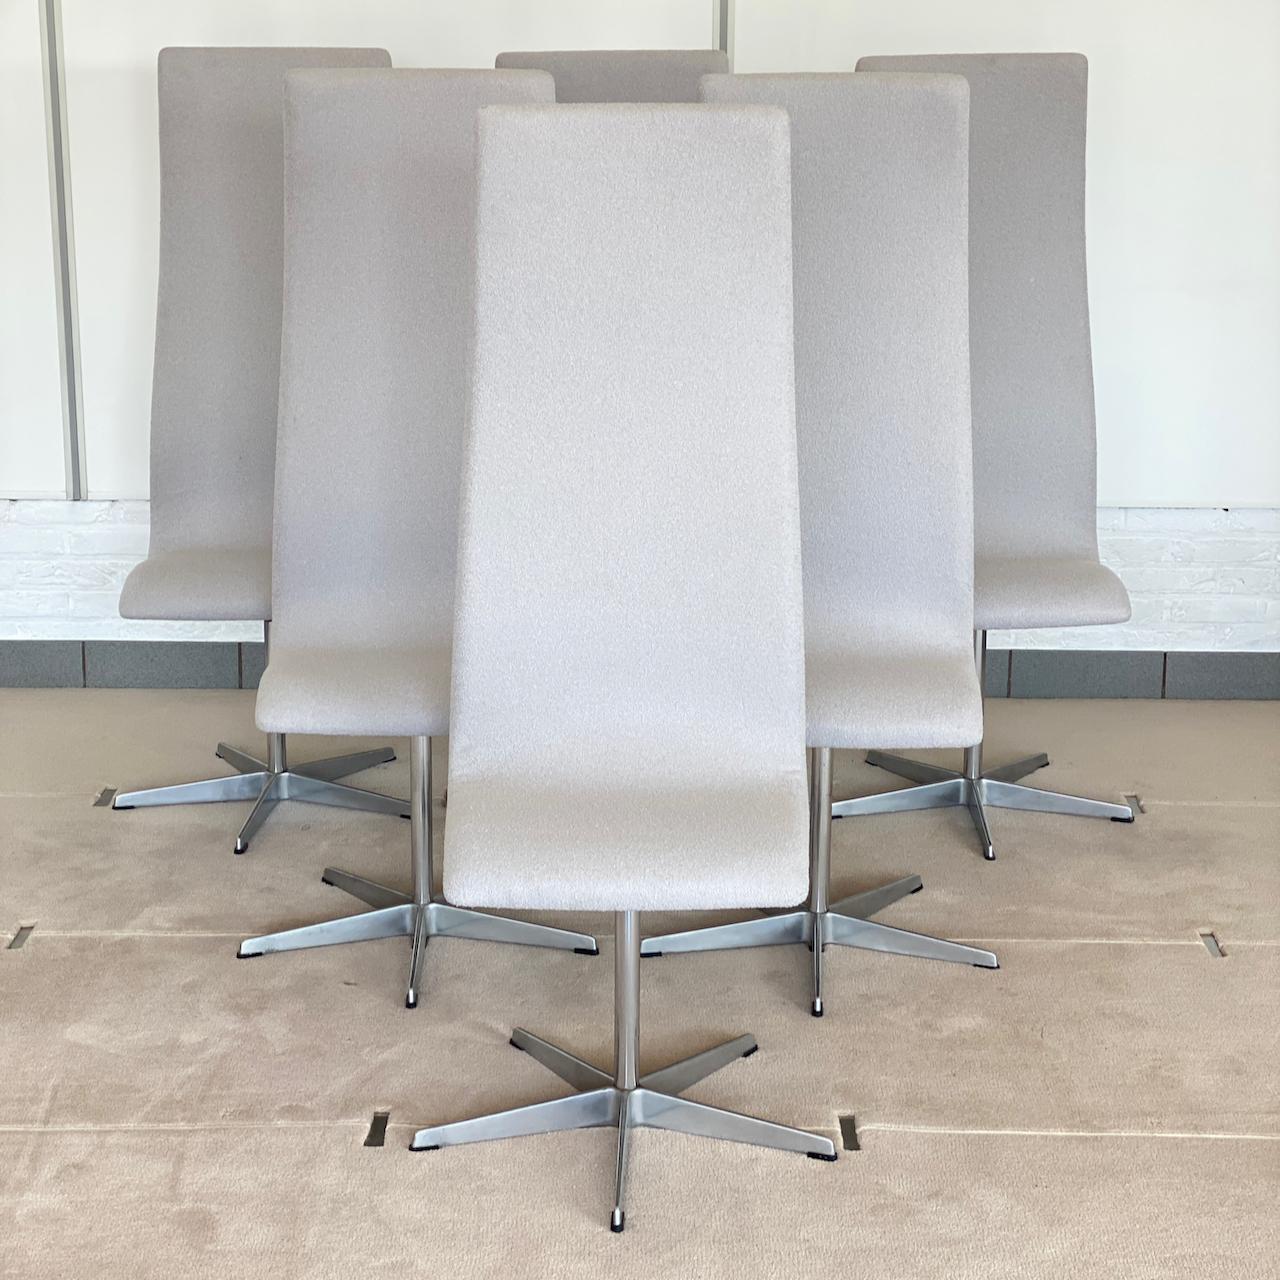 Set of 6 high-back swivel chairs on an aluminum star shaped base
Designed by famous Mid Century Modern designer by Arne Jacobson
These chairs were commissioned by the Oxford Collage in the United Kingdom for their professors in 1963
Fritz Hansen